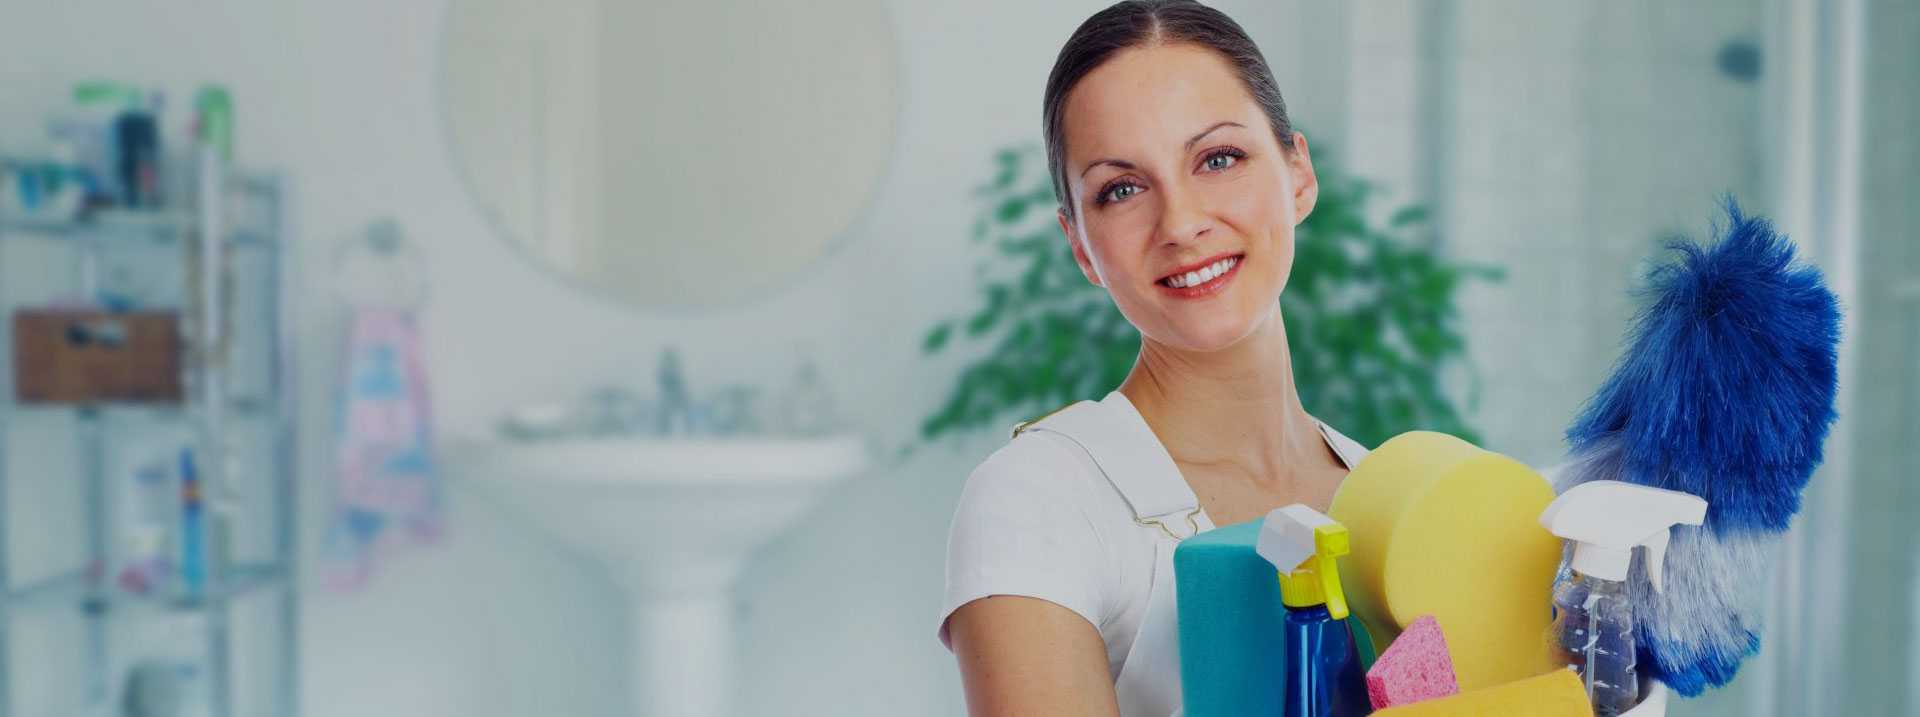 Looking For Cleaning Works? - Work With Us - Adelaide Supermaids